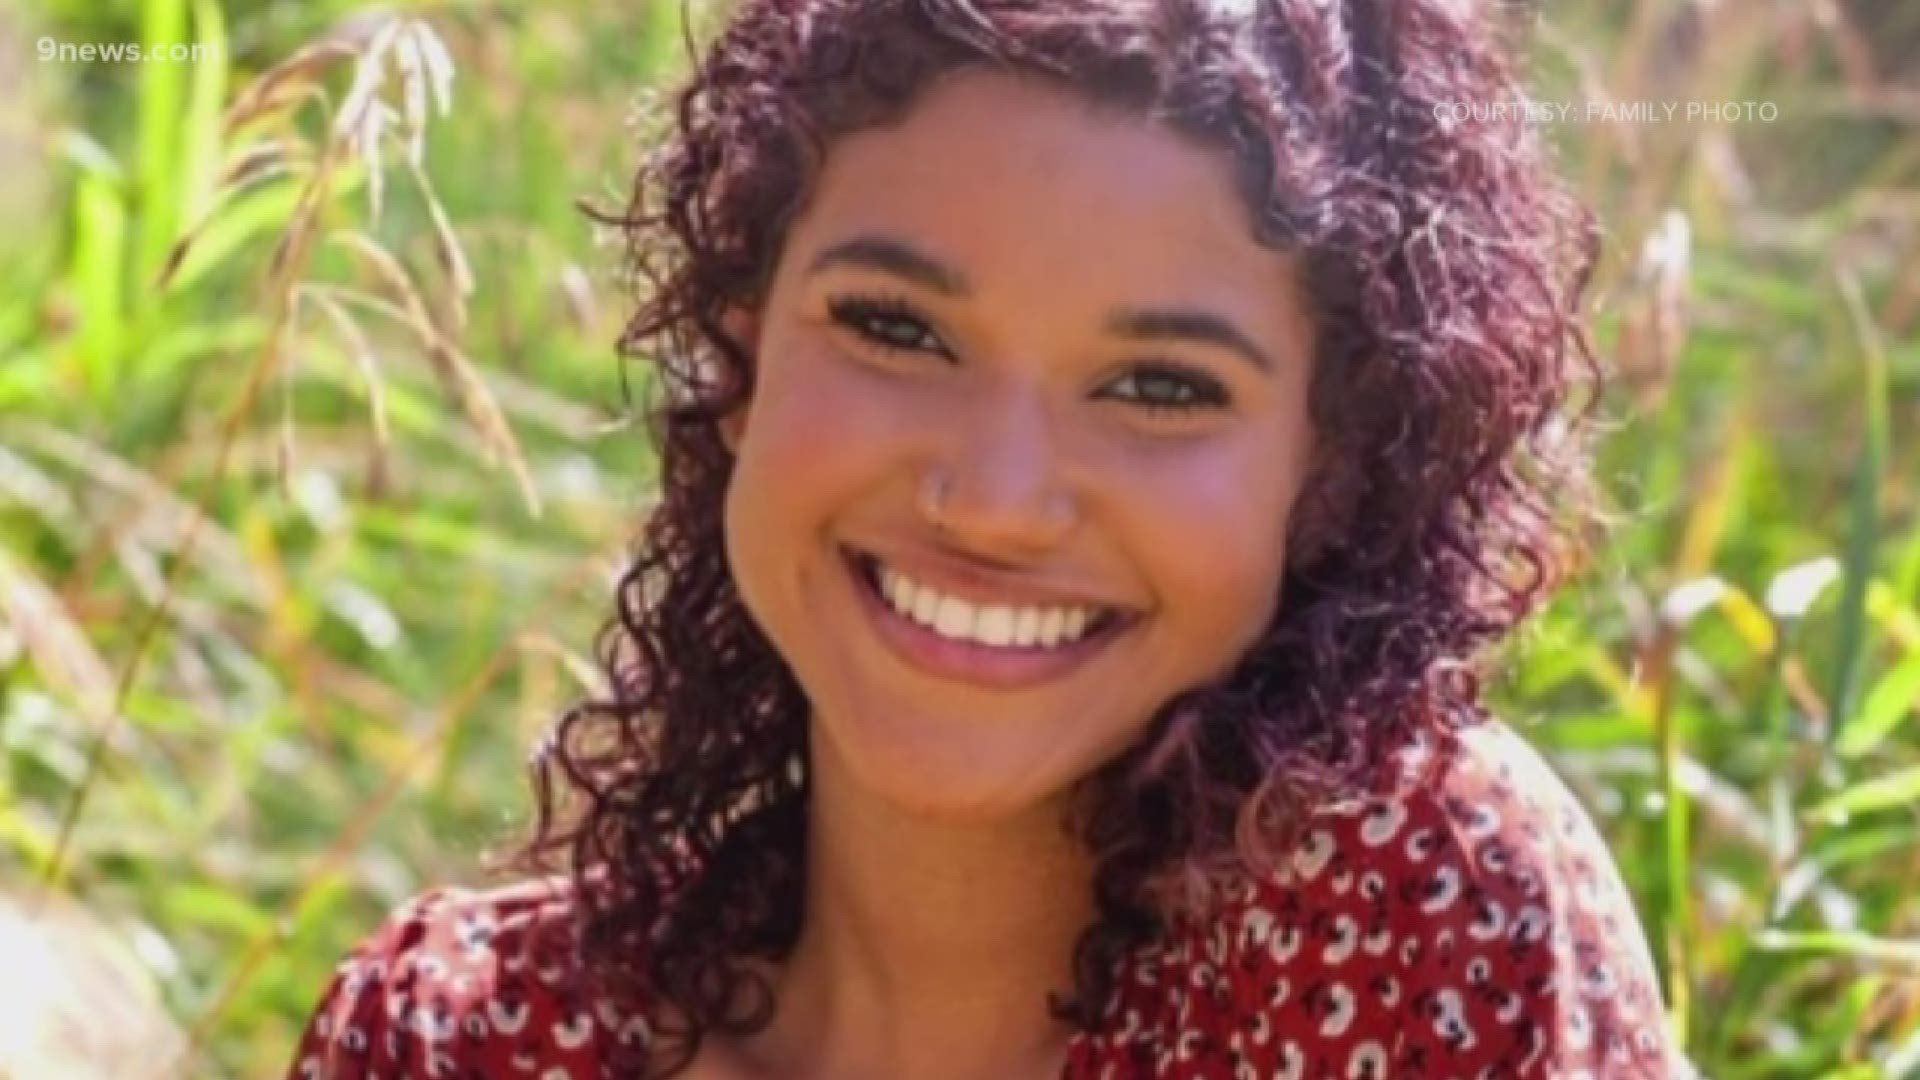 The Mile High Adventist Academy student was killed in a suspected murder-suicide this week.